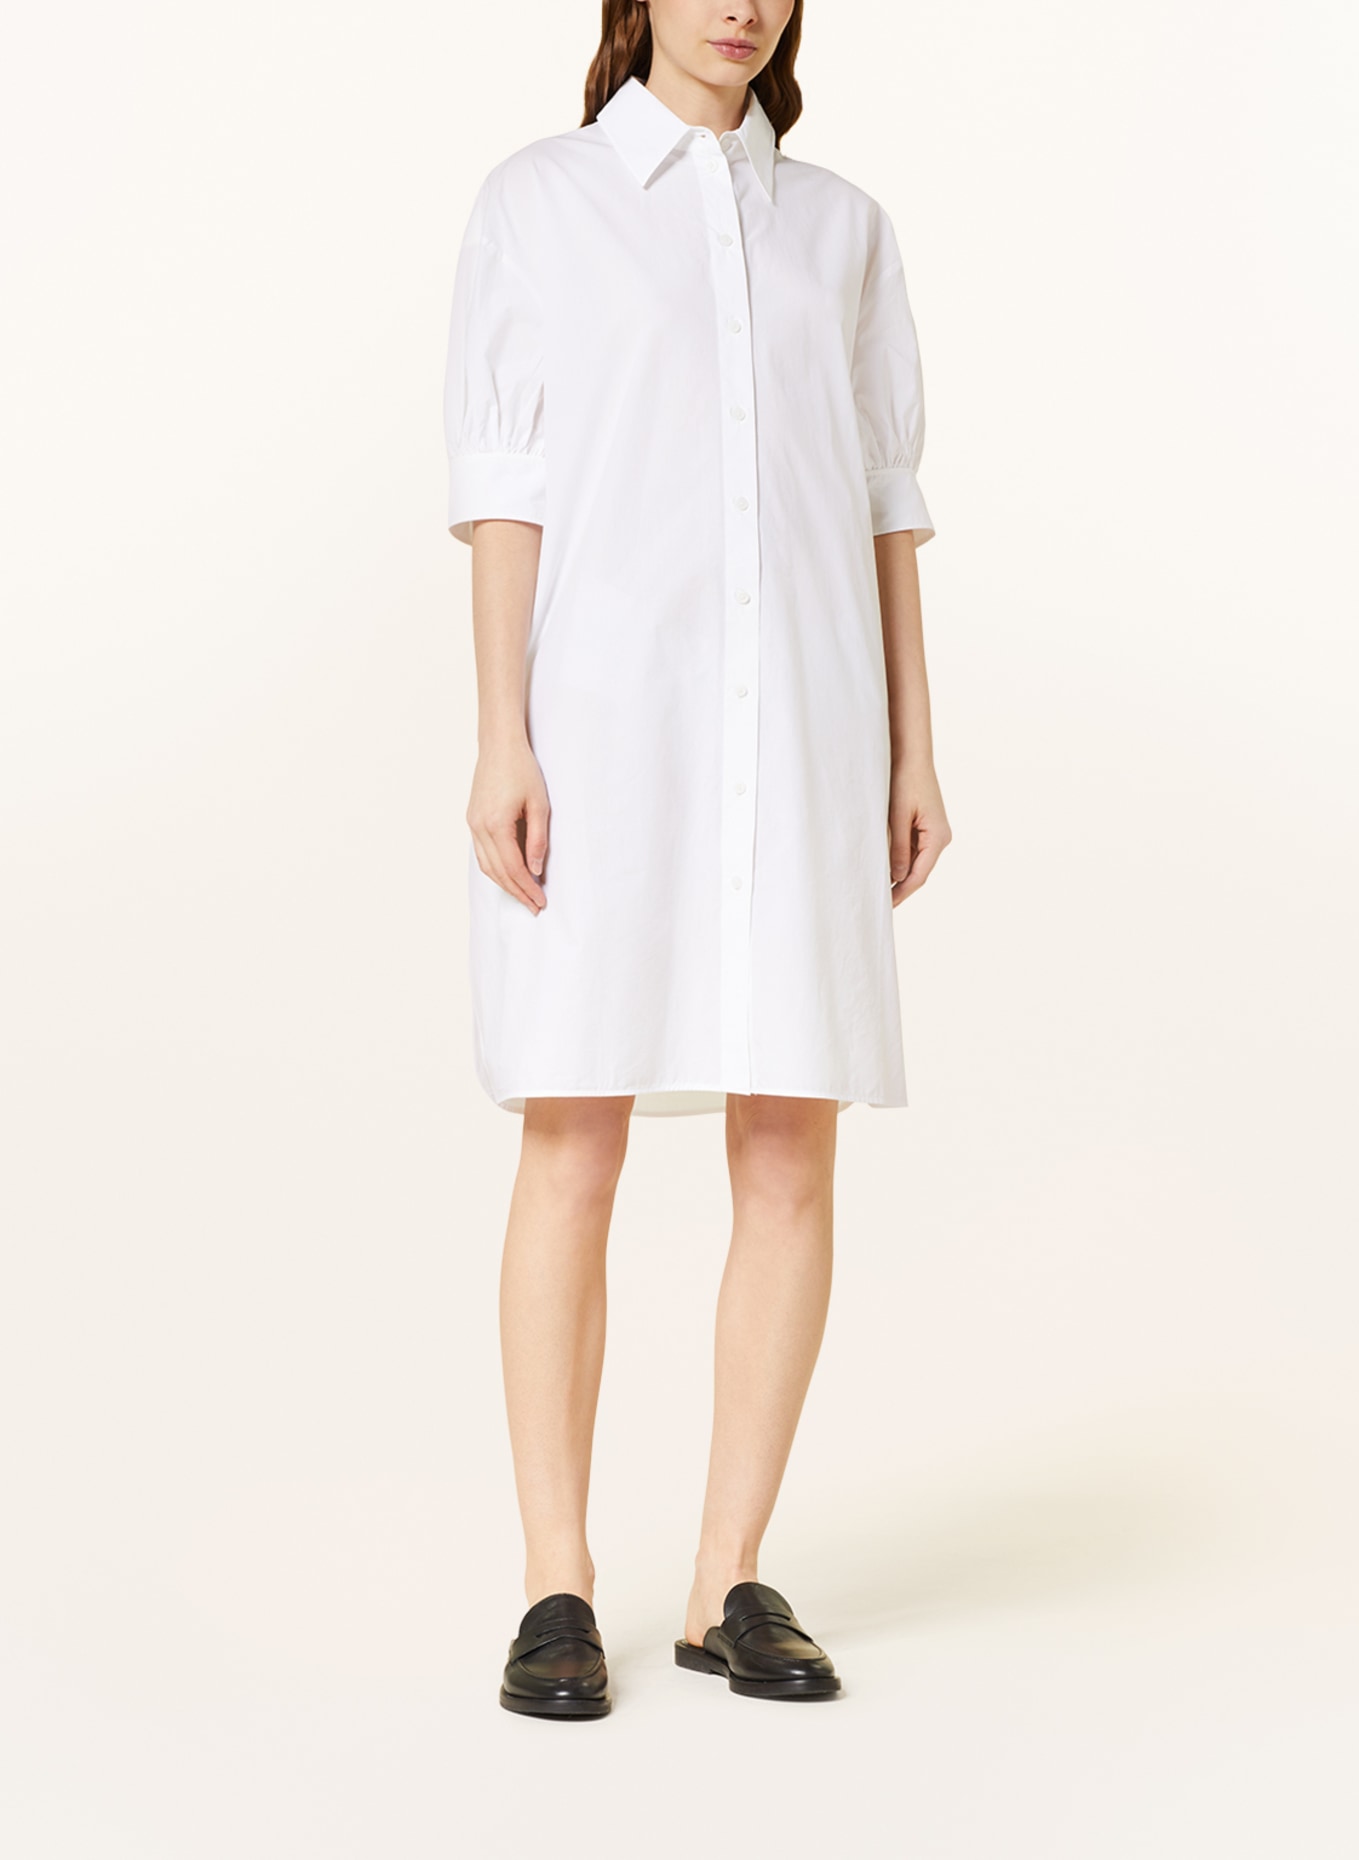 COS Shirt dress with 3/4 sleeves in white